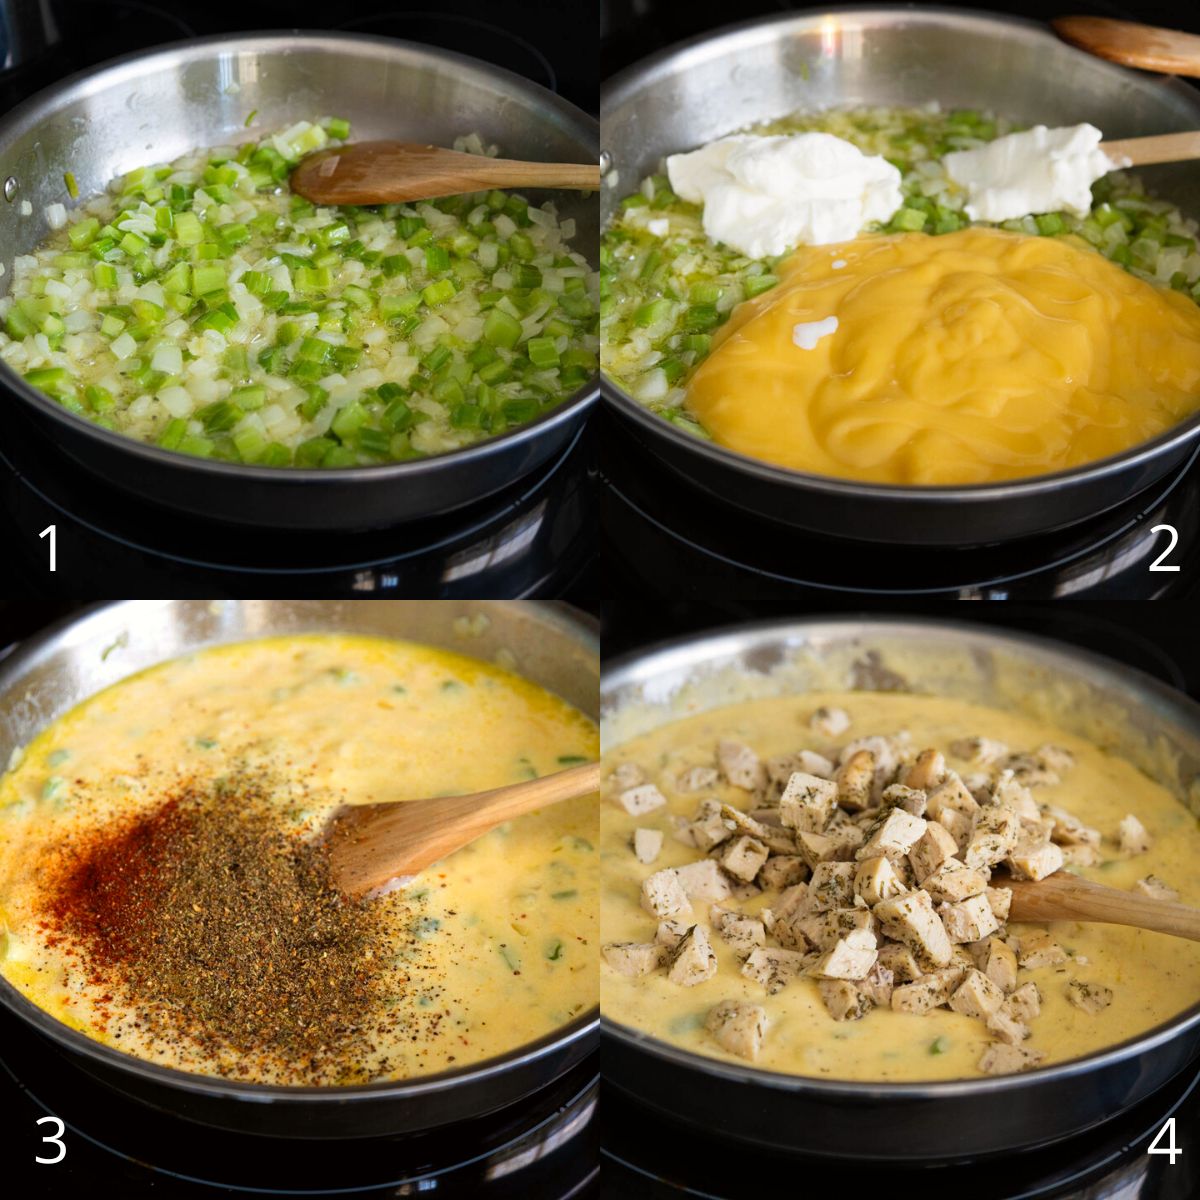 The step by step photos show how to make the creamy chicken filling for the casserole.